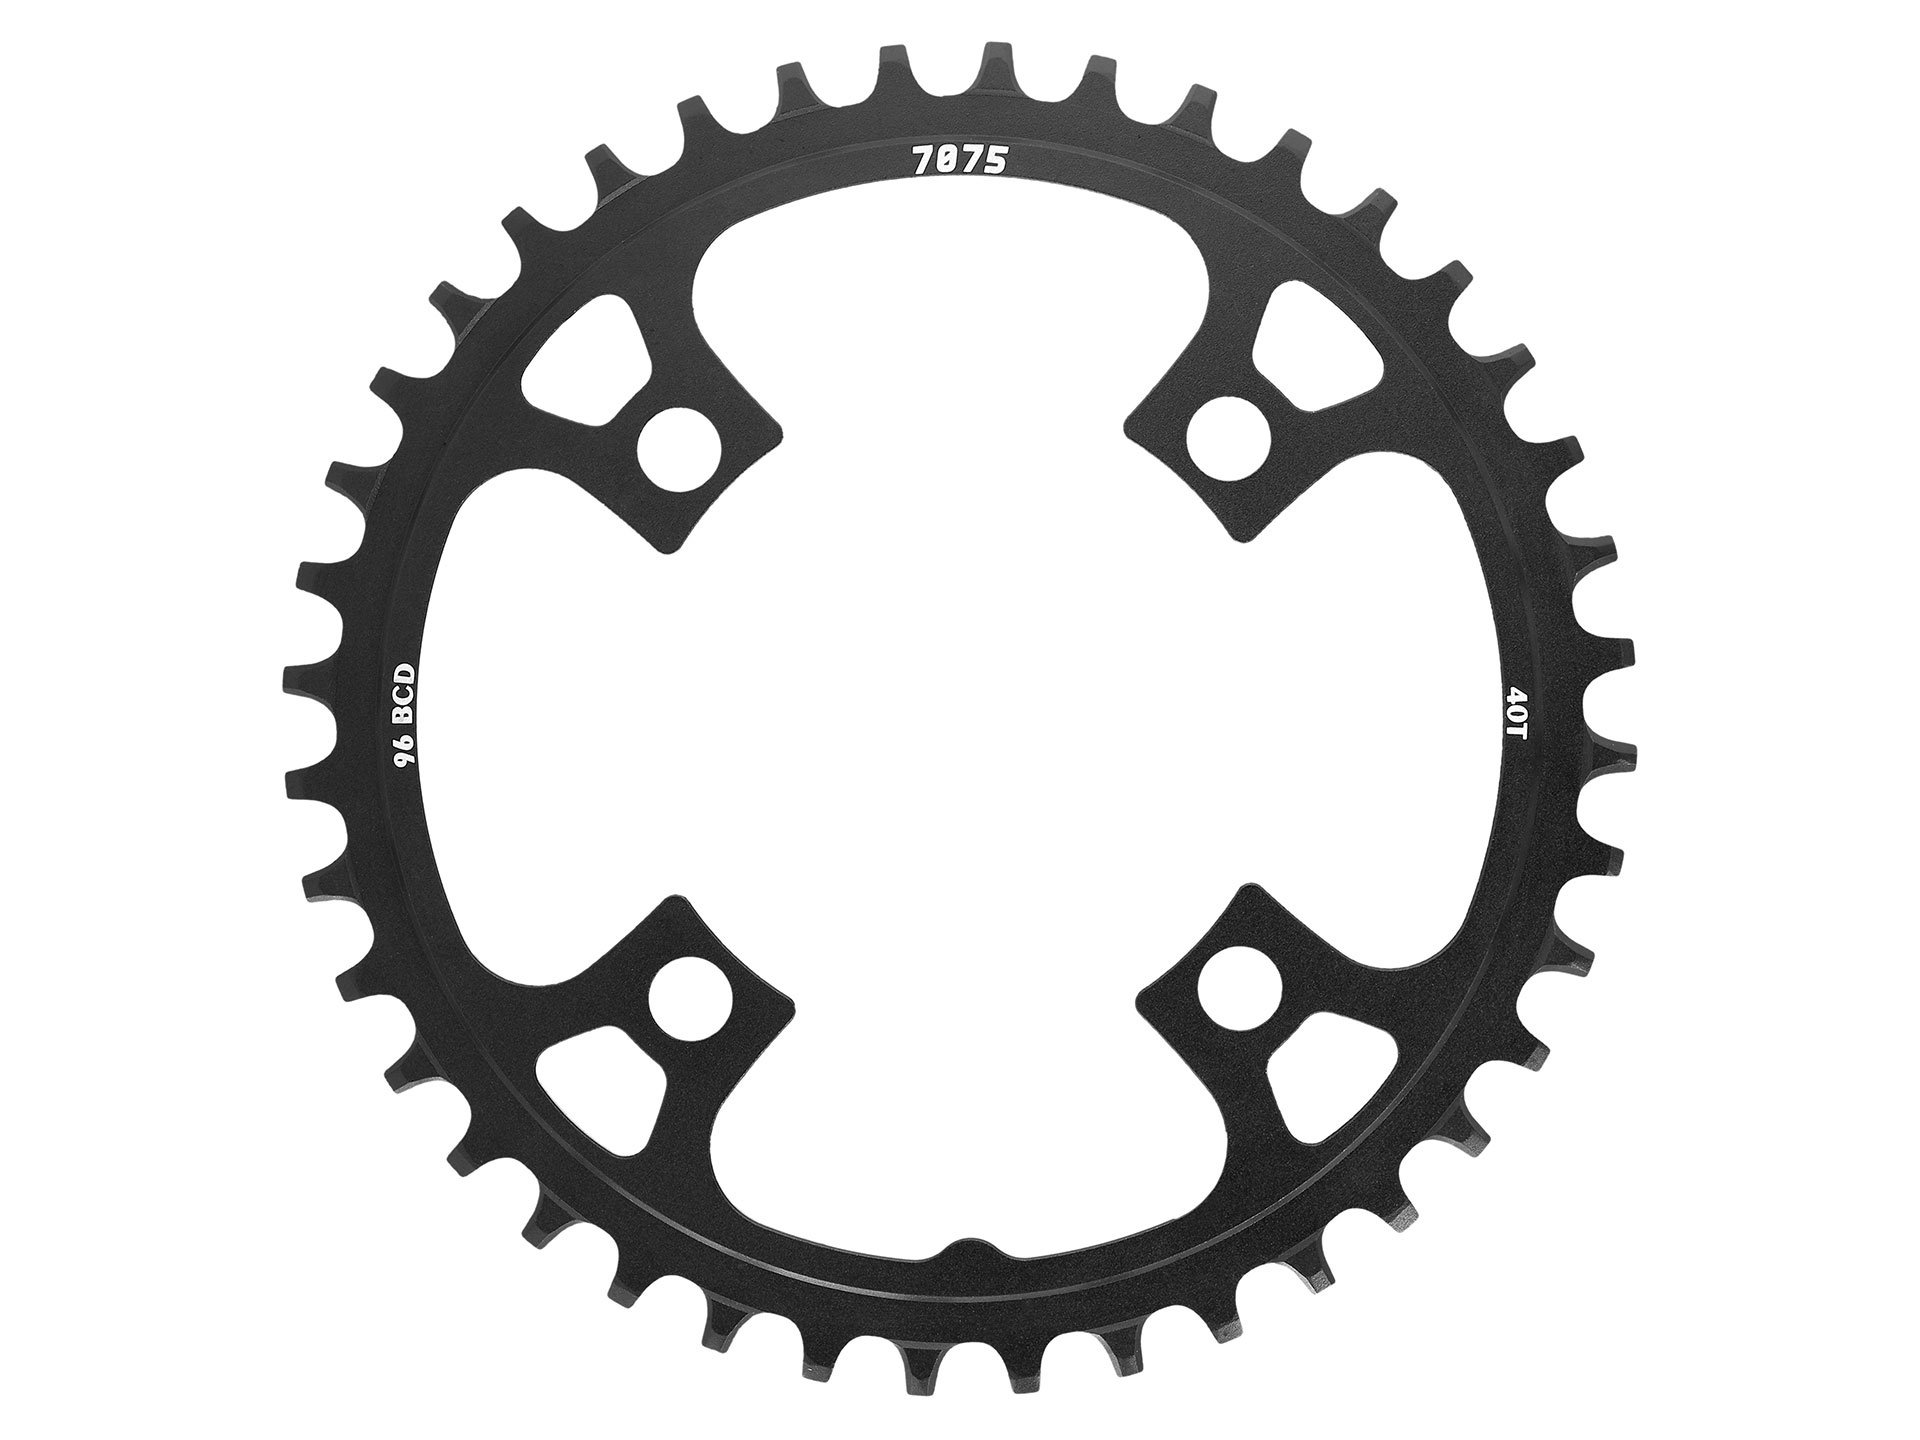 36T 96 BCD Narrow-Wide Alloy Chainring Black Sunrace